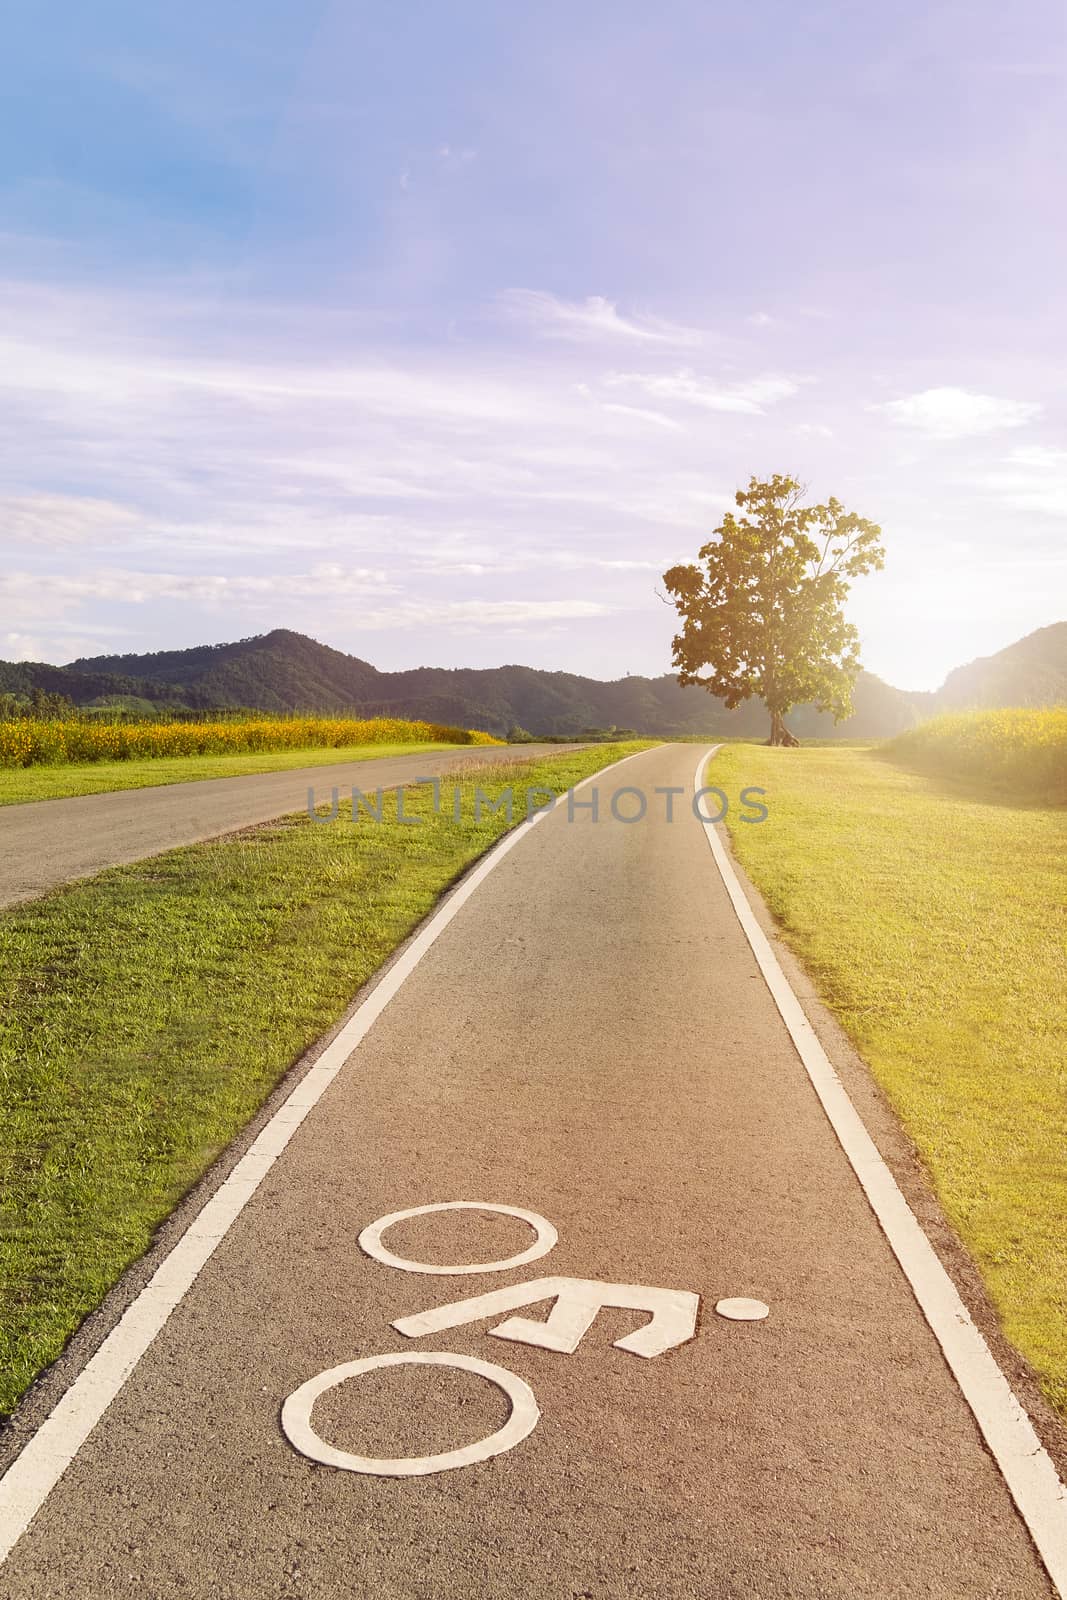 Scenery bicycle lane on a hill with a tree, blue sky and mountain forest background.